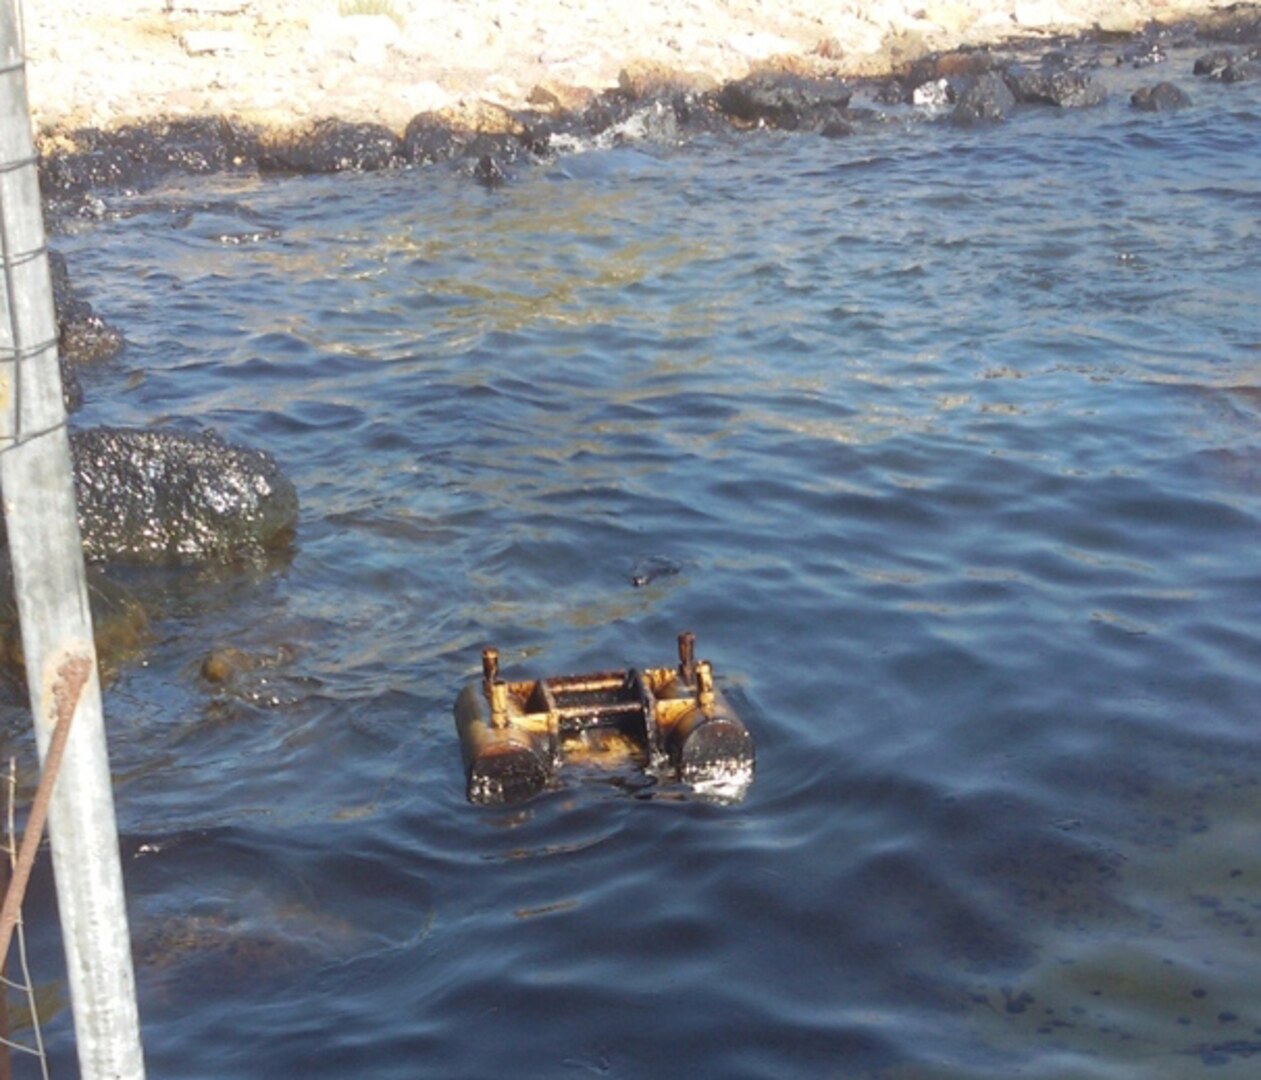 mobile oil-water separator floats on the surface of the water